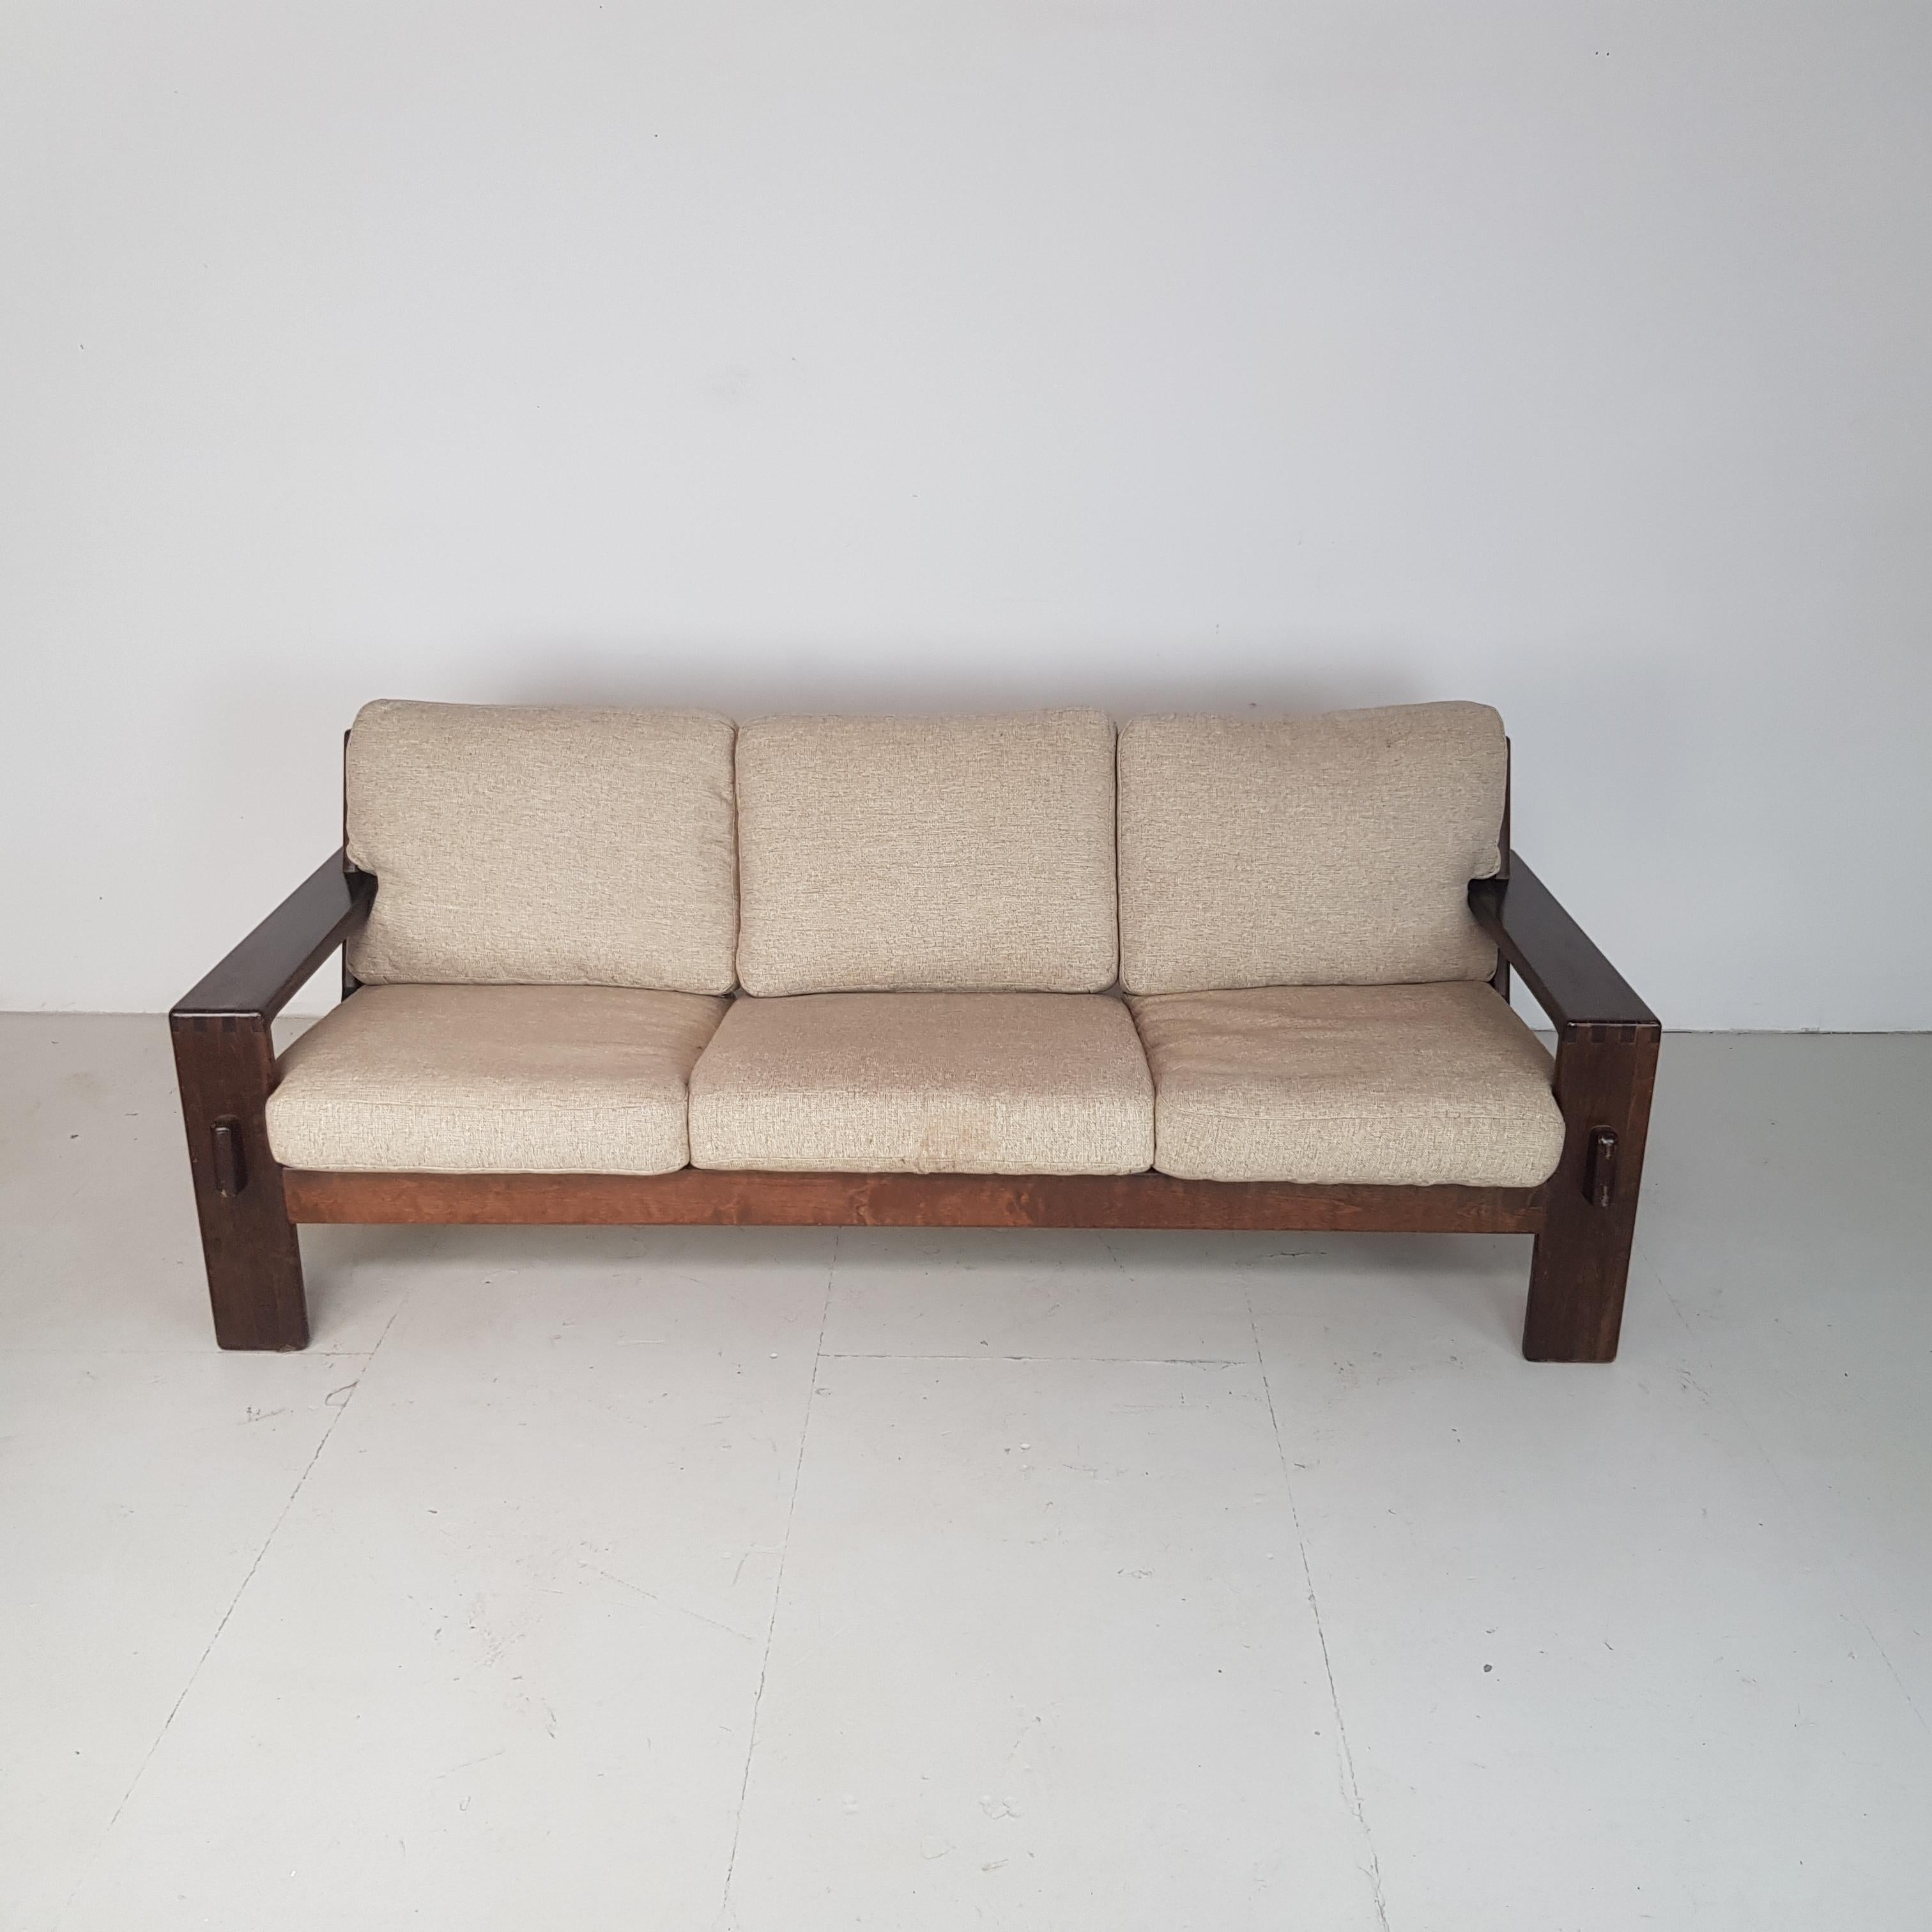 Bonanza 3-Seat Sofa by Esko Pajamies for Asko, 1960s In Good Condition For Sale In Lewes, East Sussex